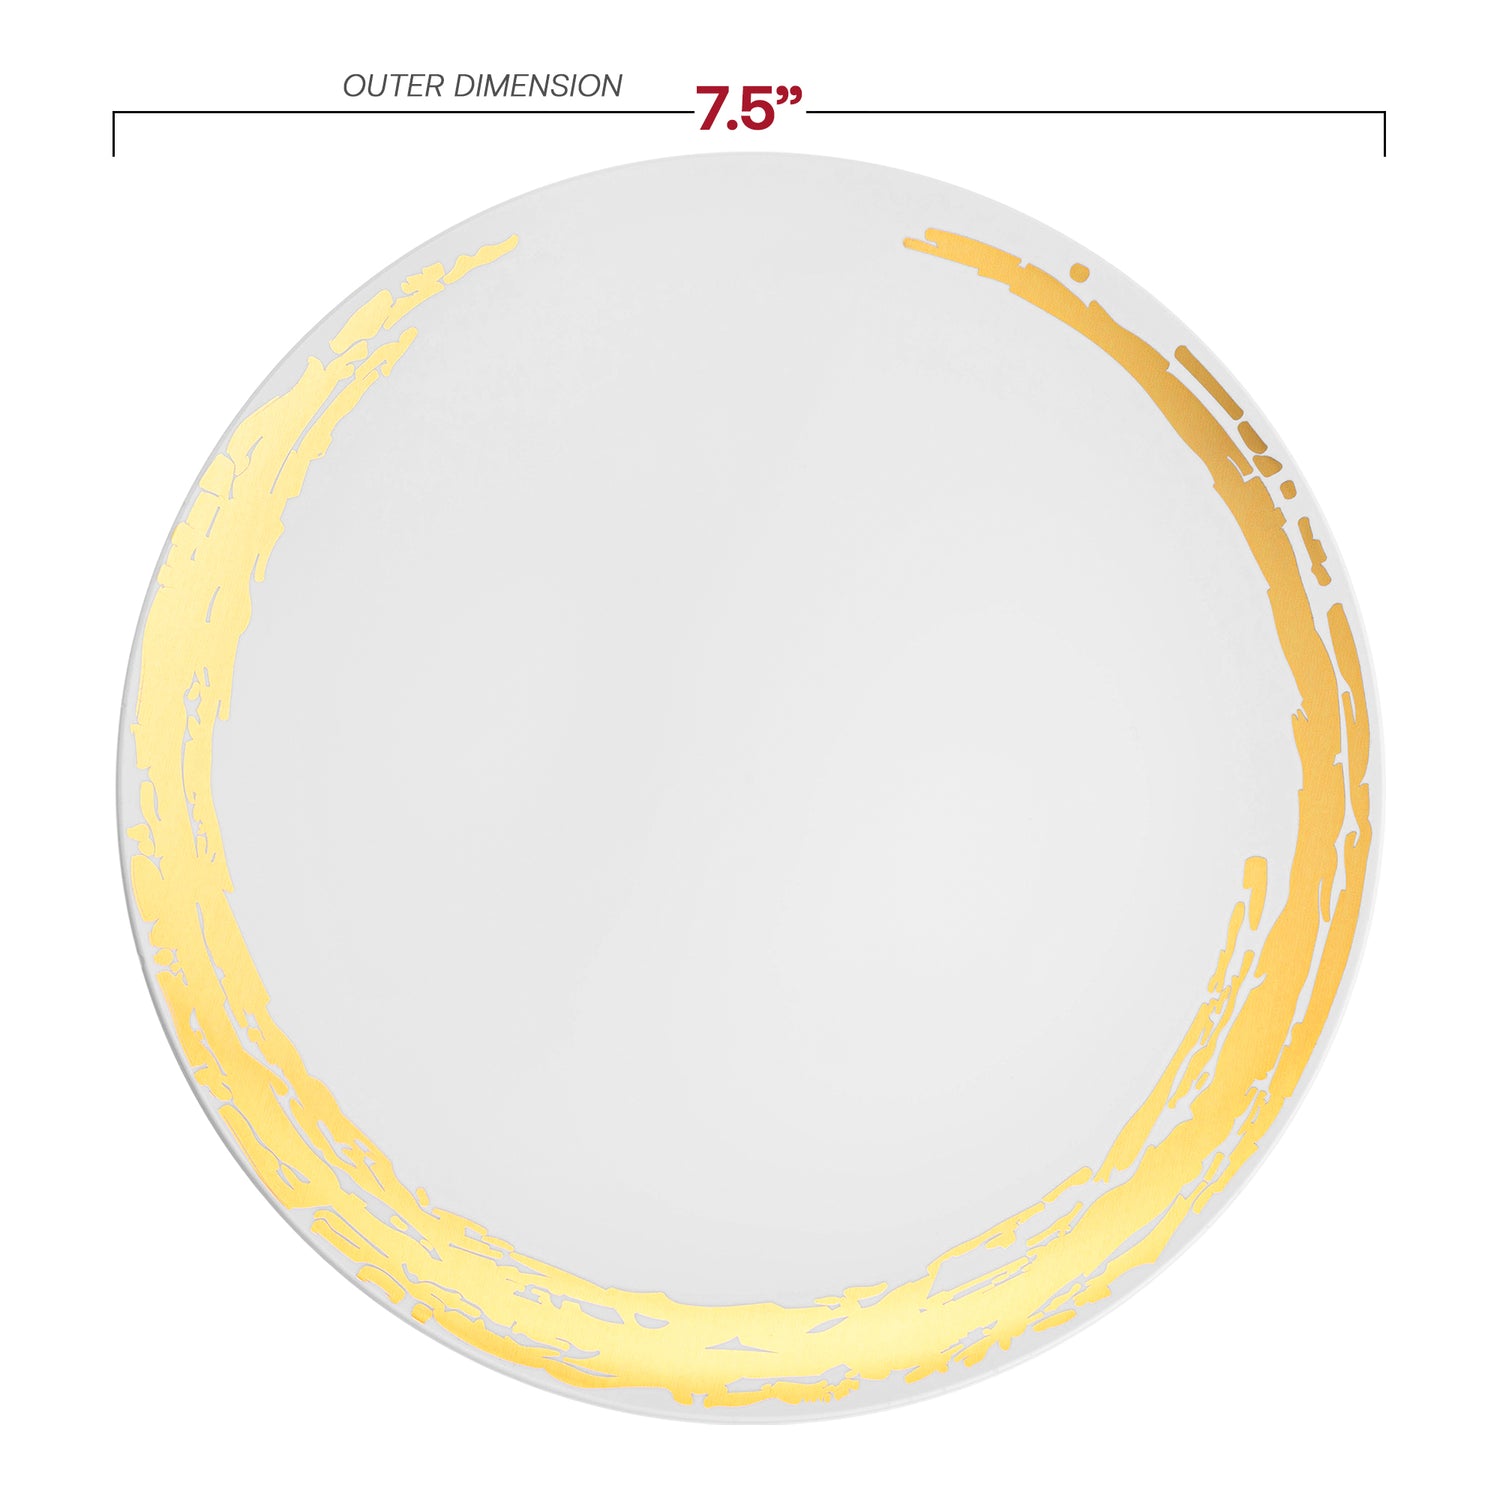 White with Gold Moonlight Round Disposable Plastic Appetizer/Salad Plates (7.5") Dimension | The Kaya Collection